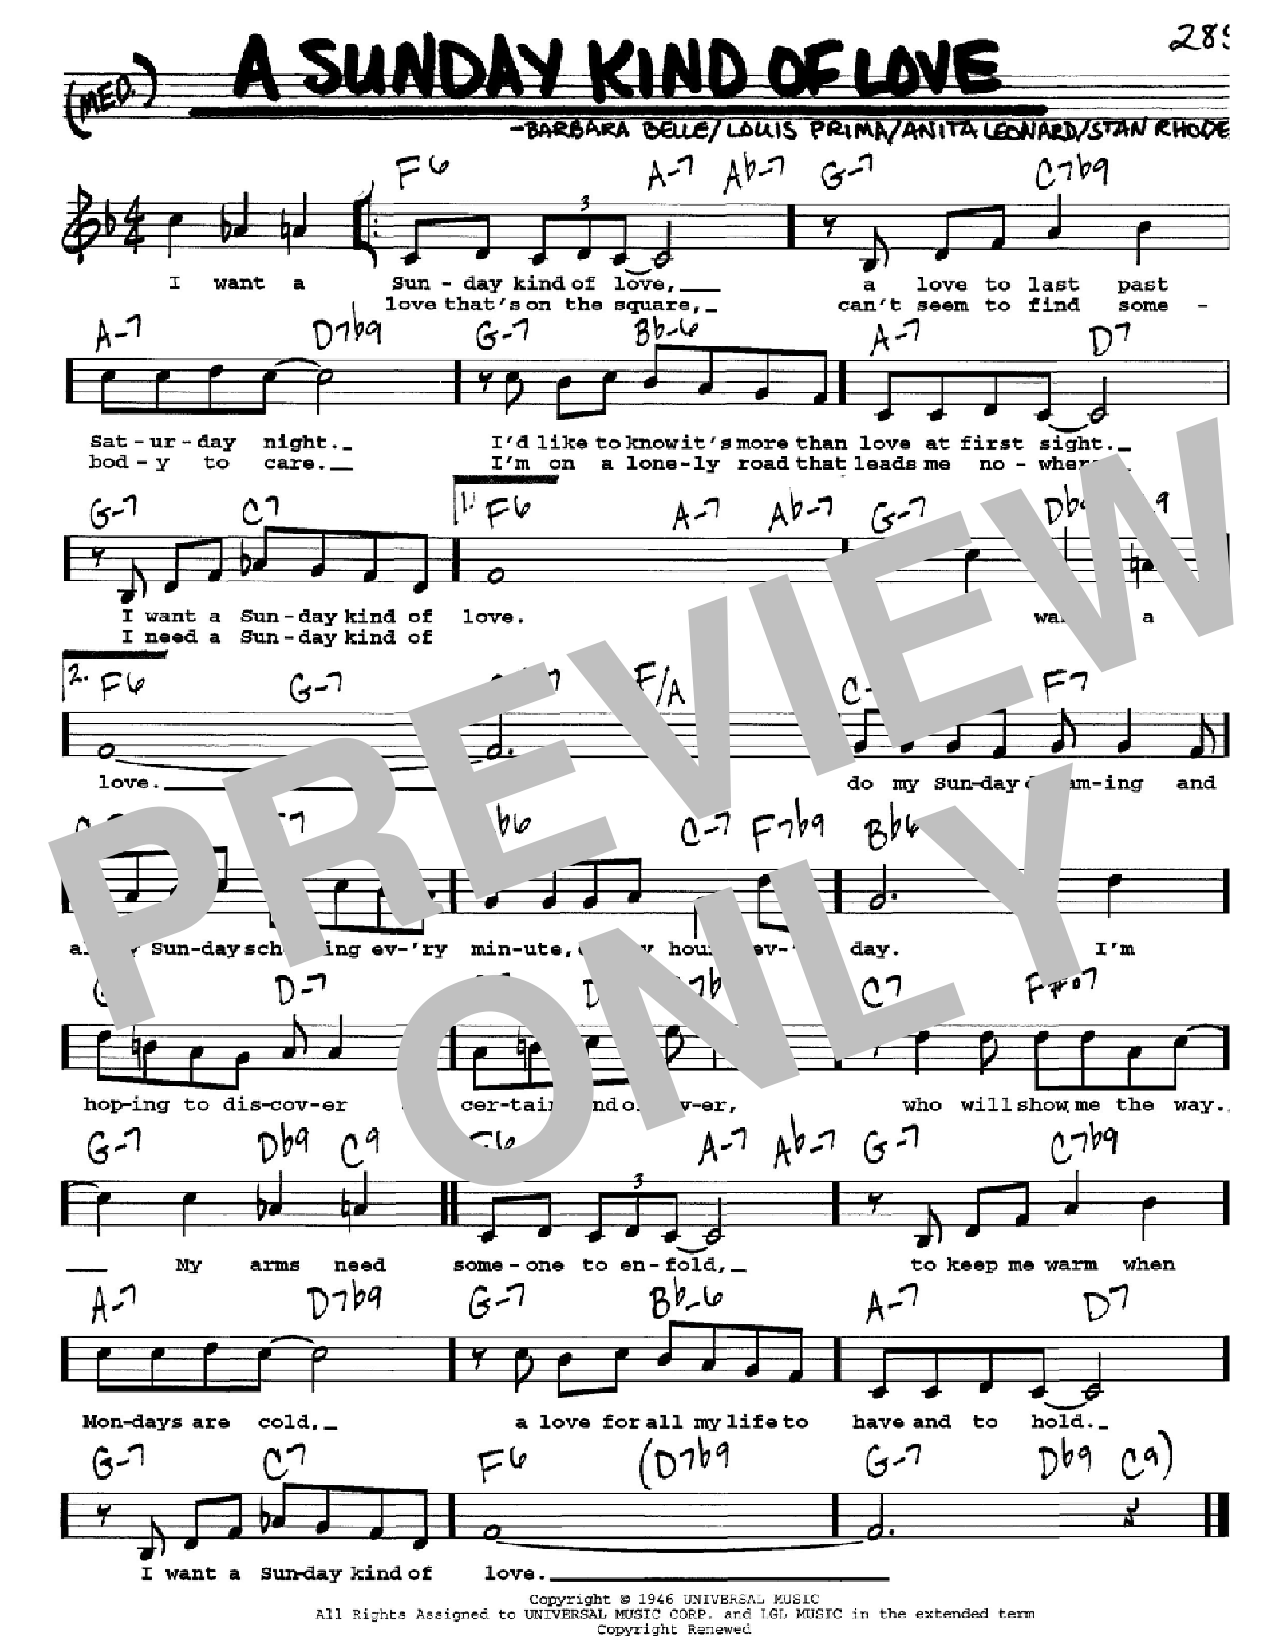 Download Louis Prima A Sunday Kind Of Love Sheet Music